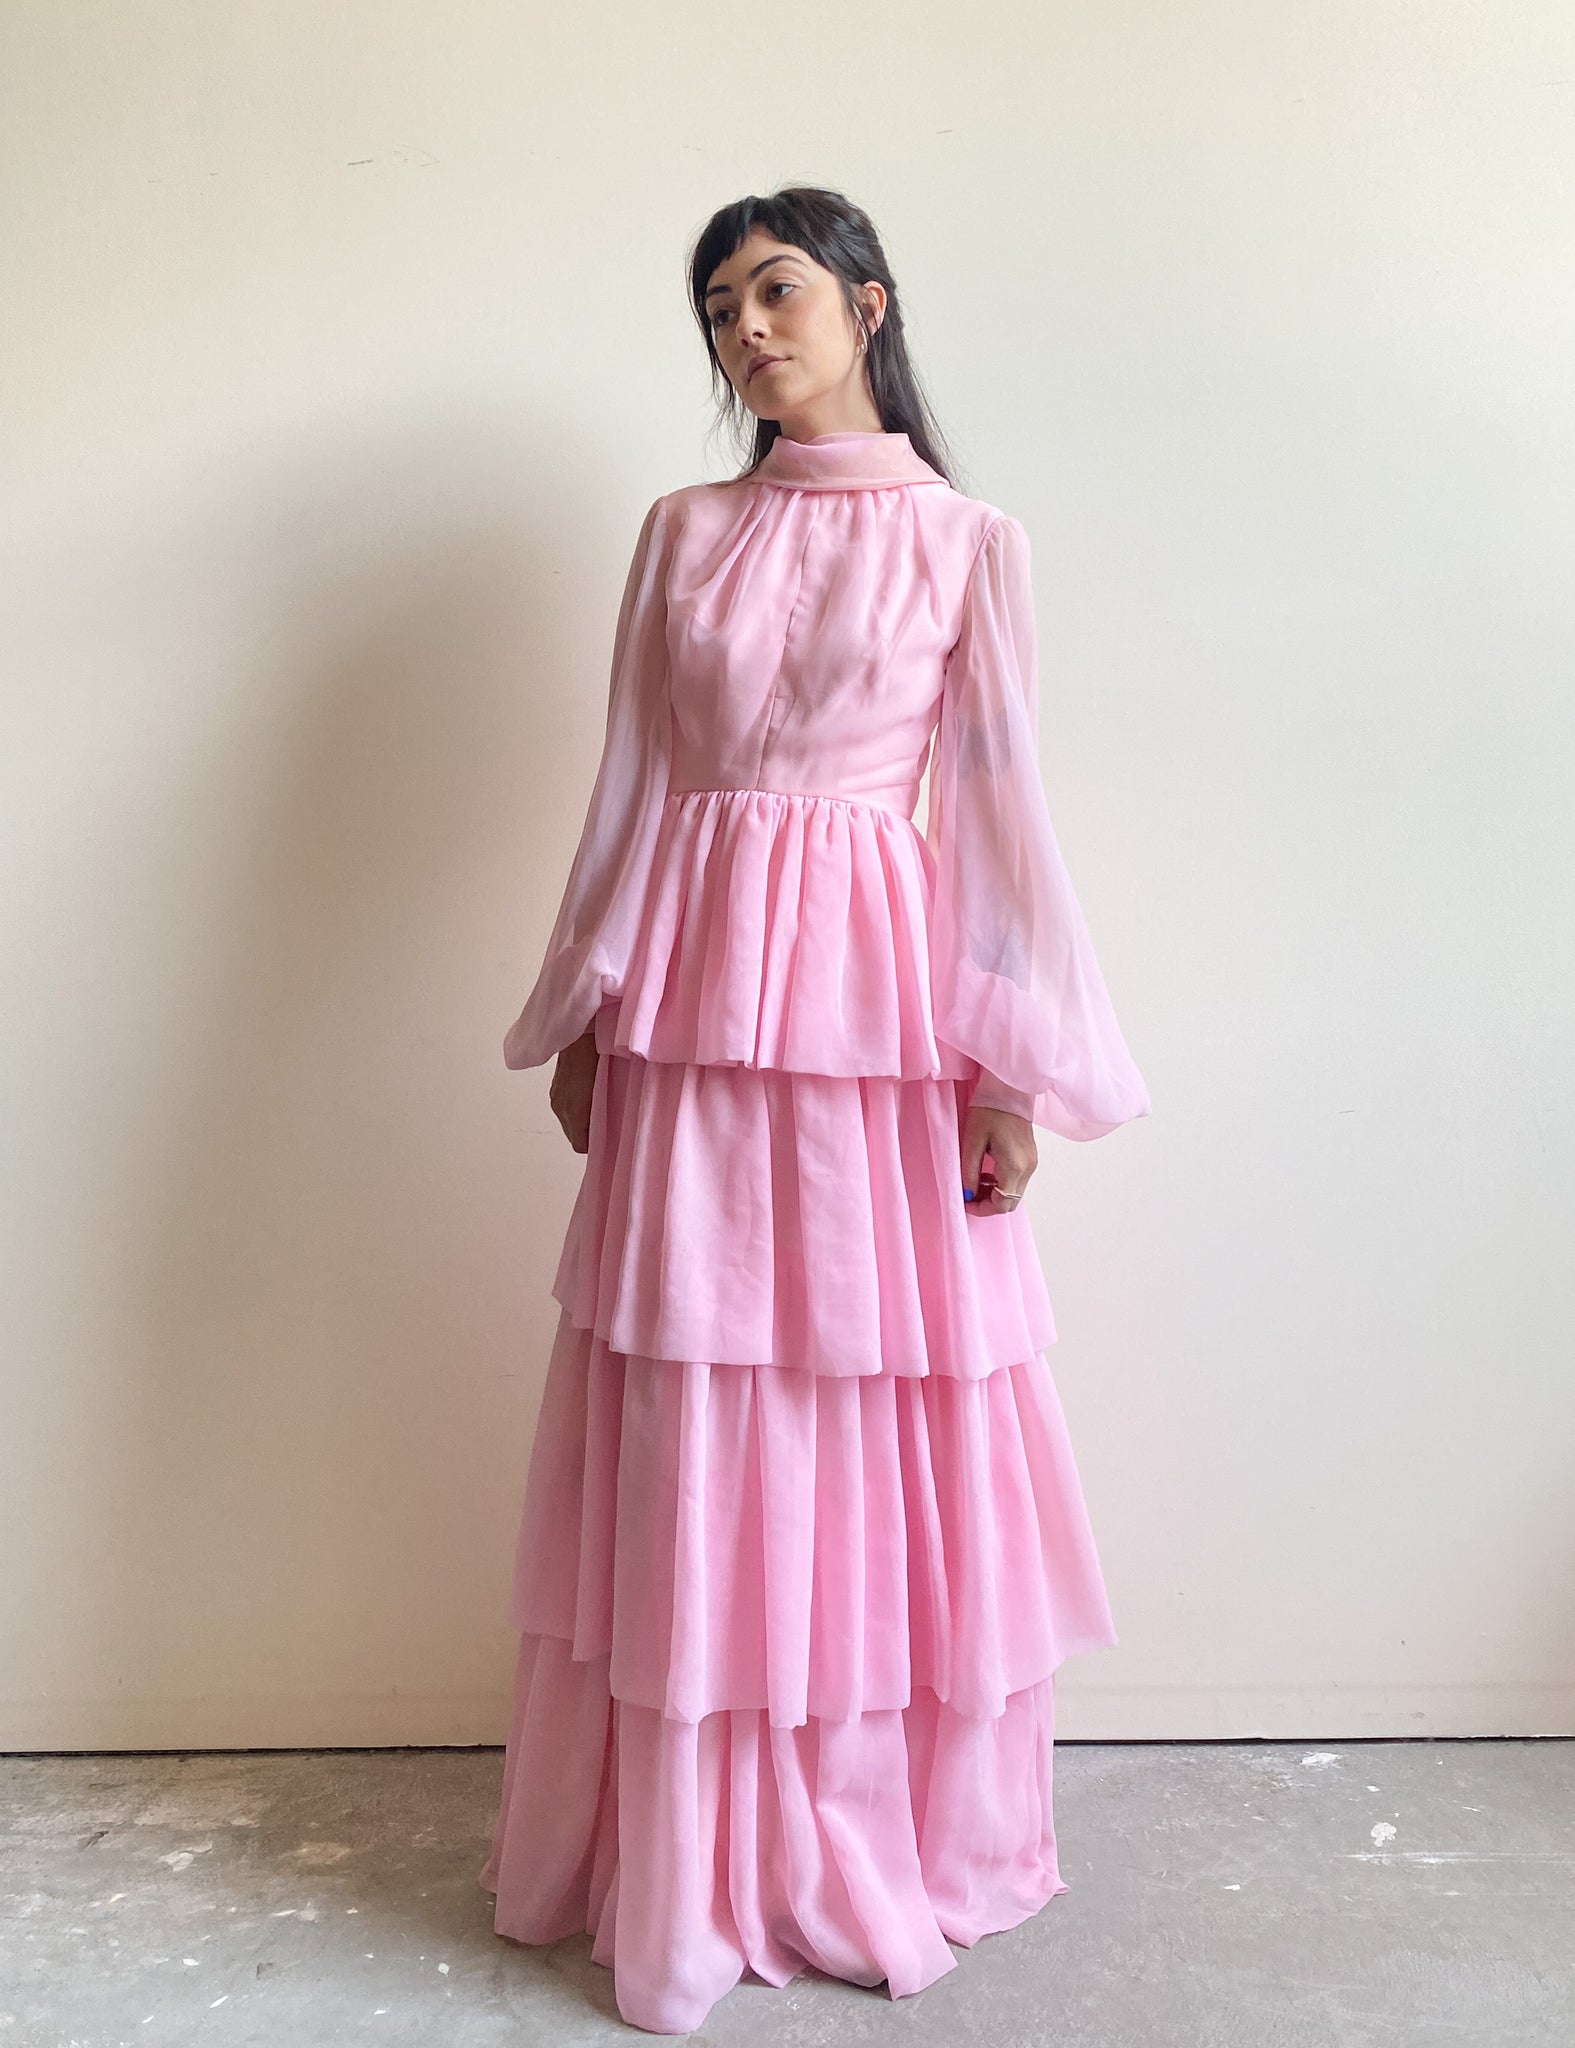 Vintage Light Pink Ruffle Evening Gown (S)